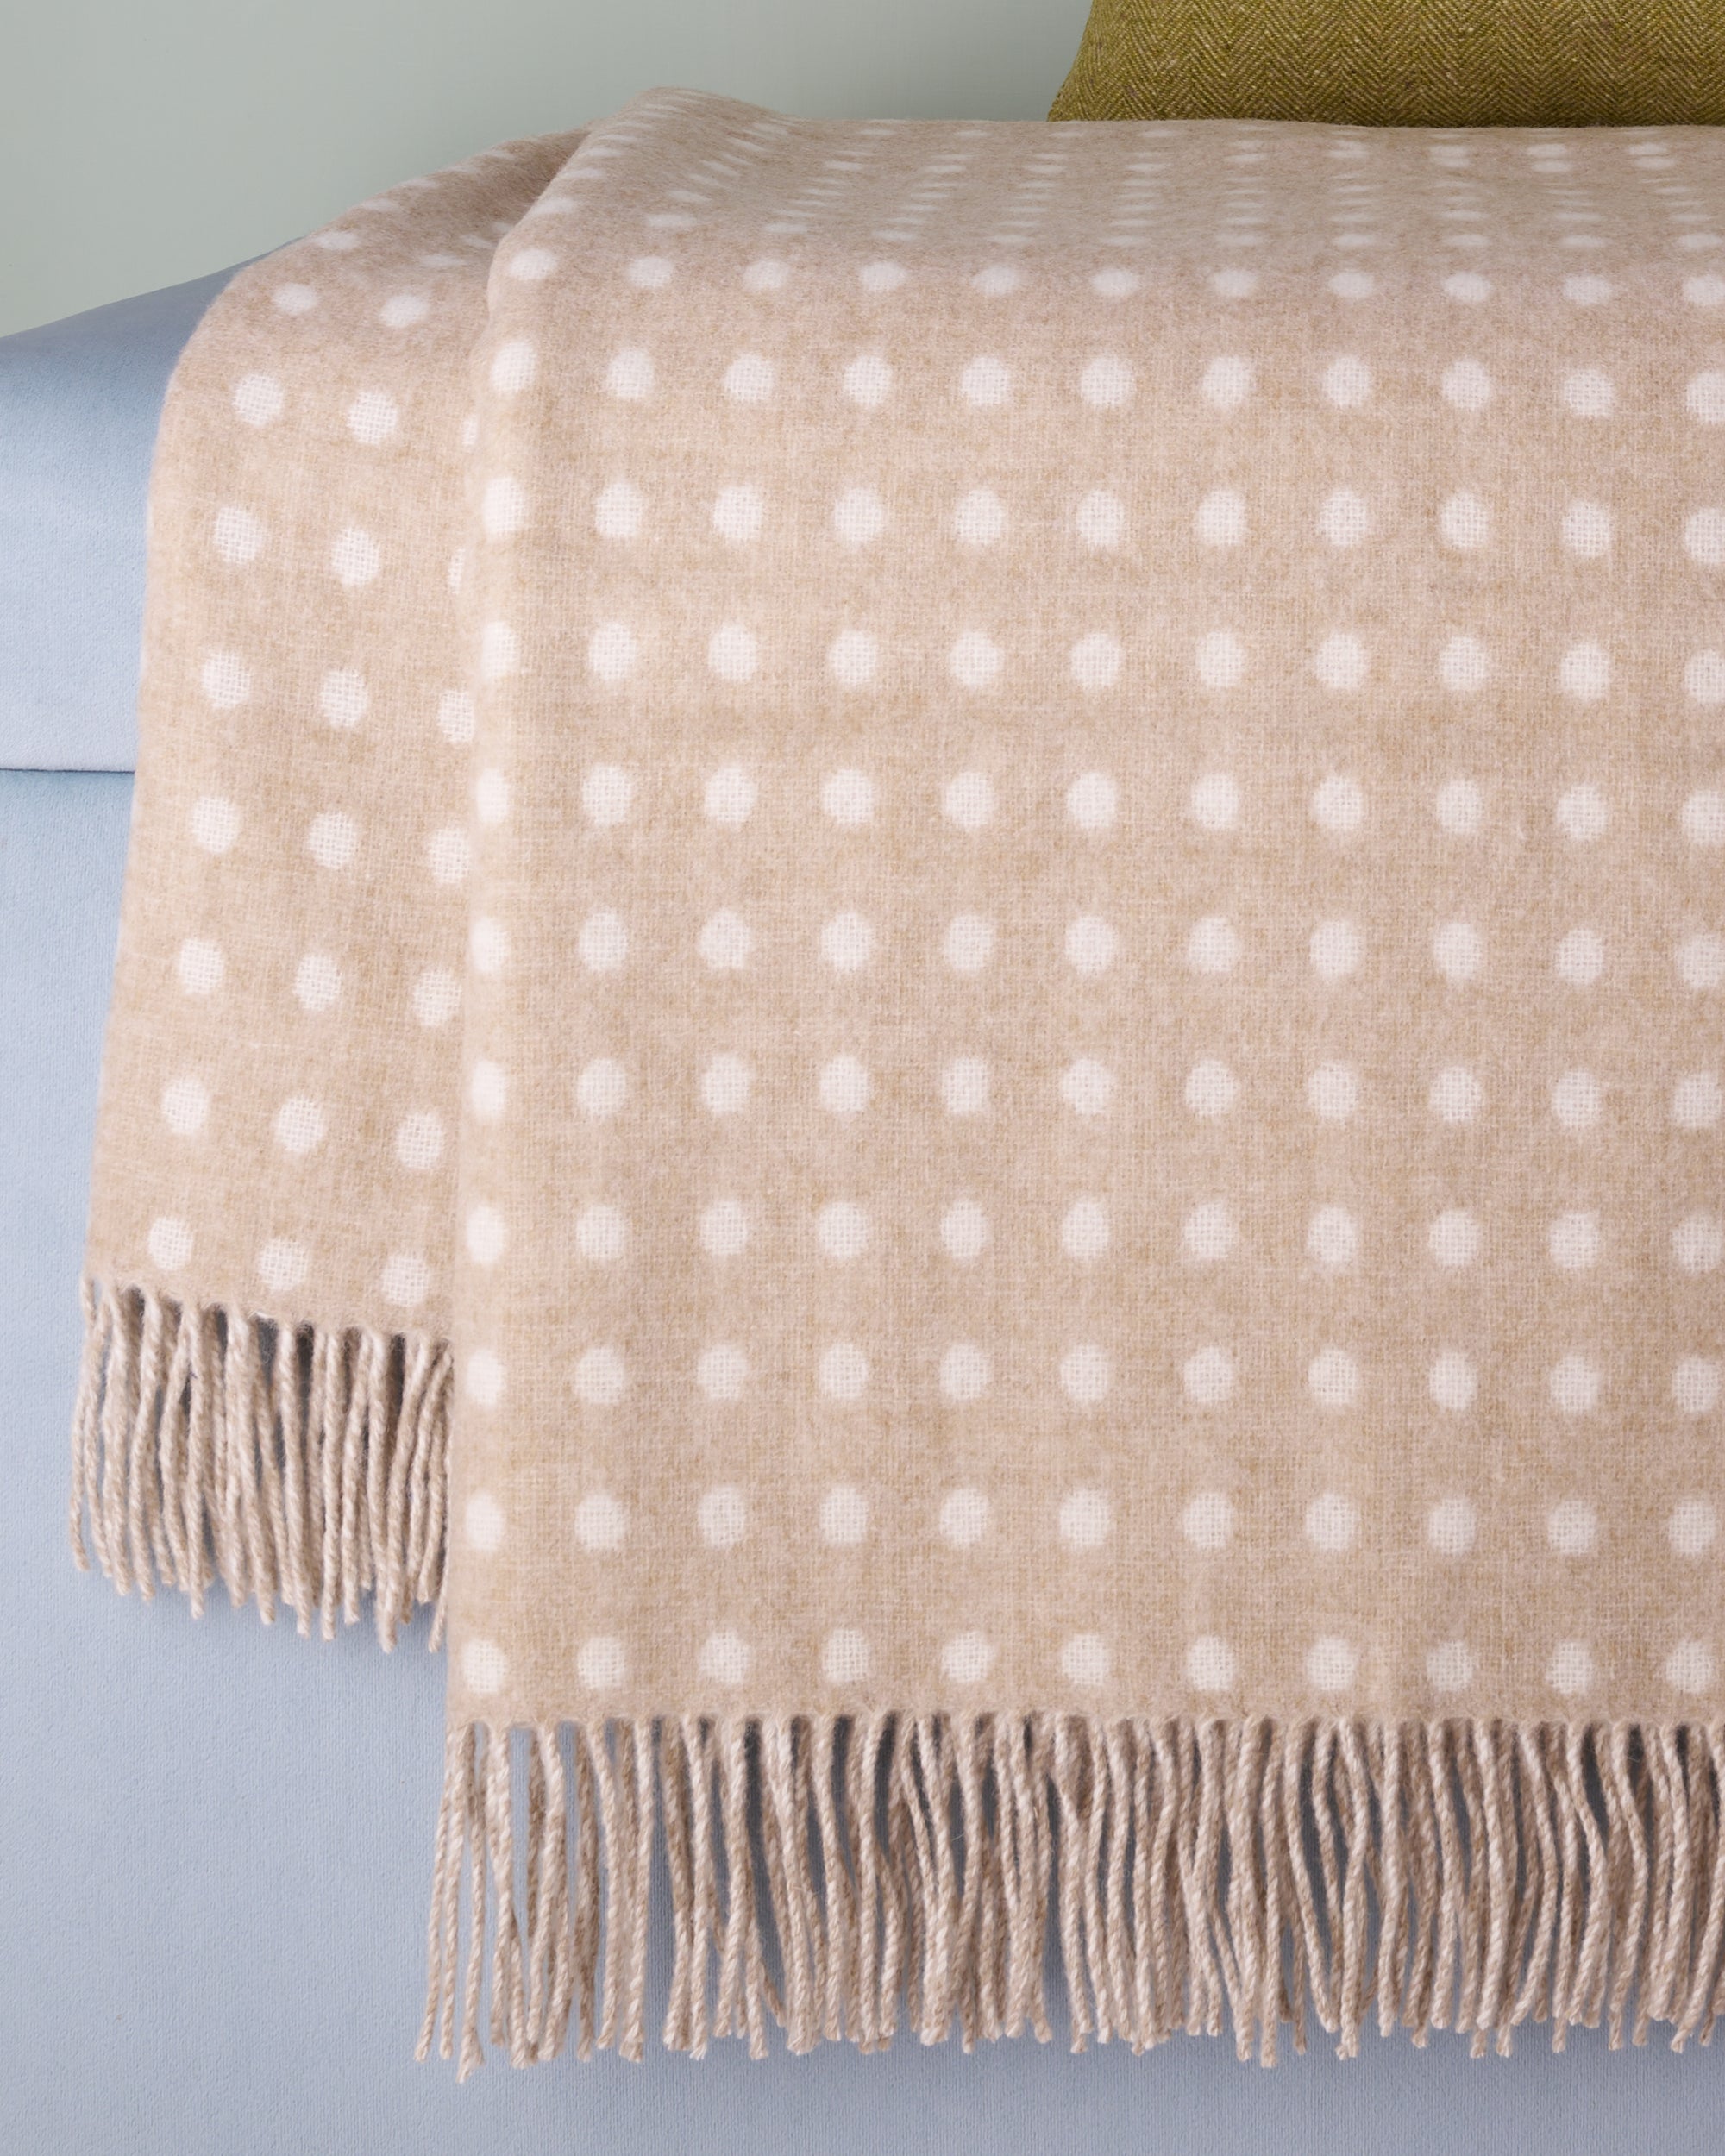 Bronte by Moon Natural Spot Merino Lambswool Throw